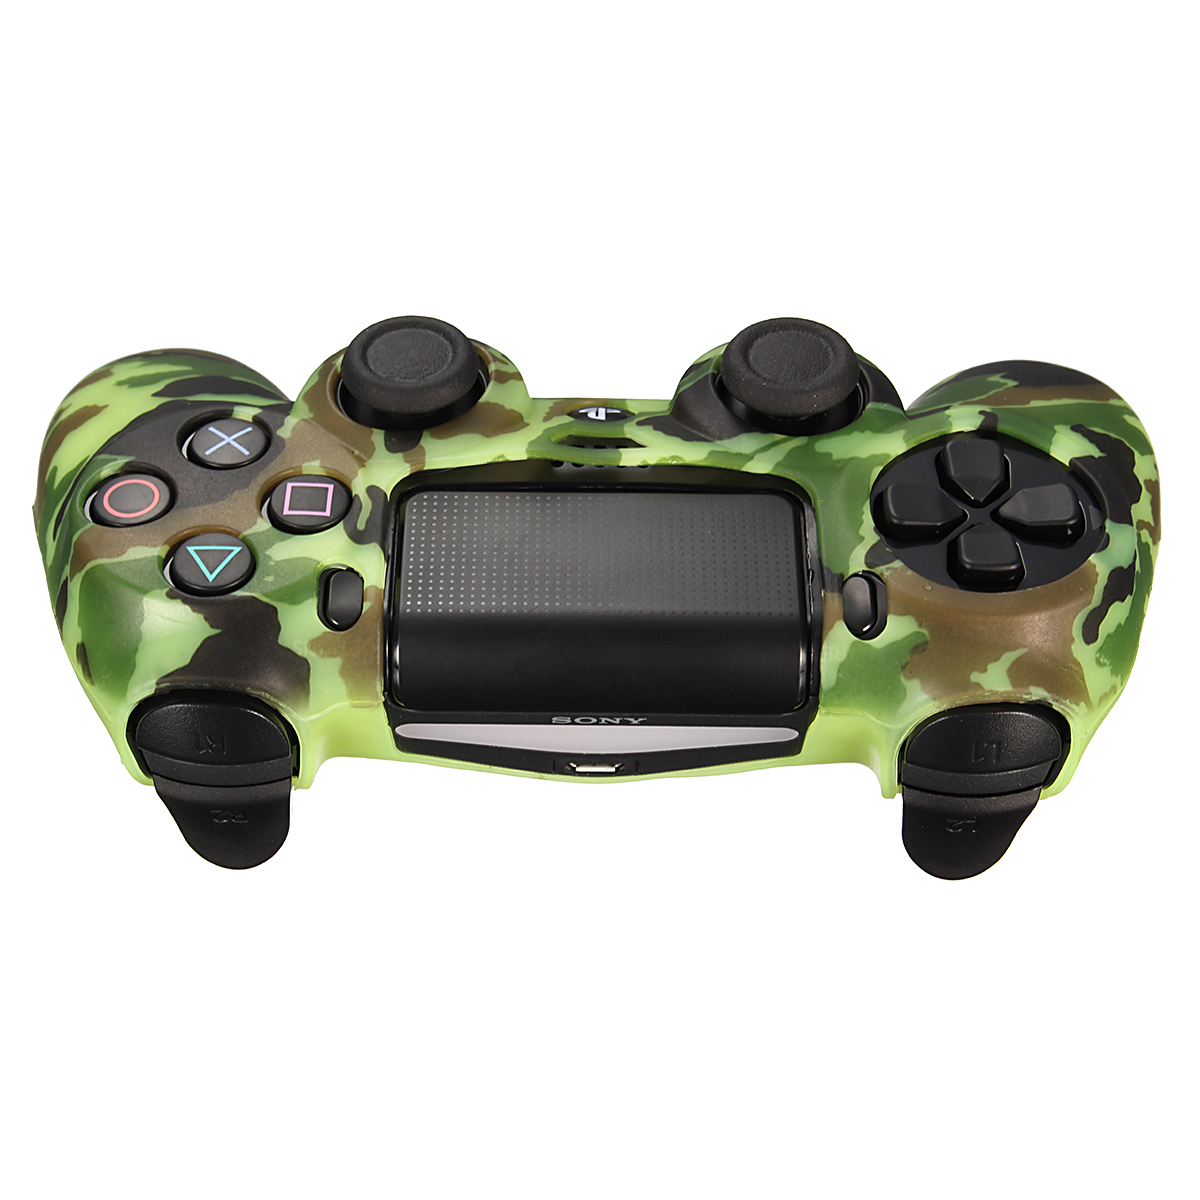 Durable Decal Camouflage Grip Cover Case Silicone Rubber Soft Skin Protector for Playstation 4 for Dualshock 4 Gamepad 13